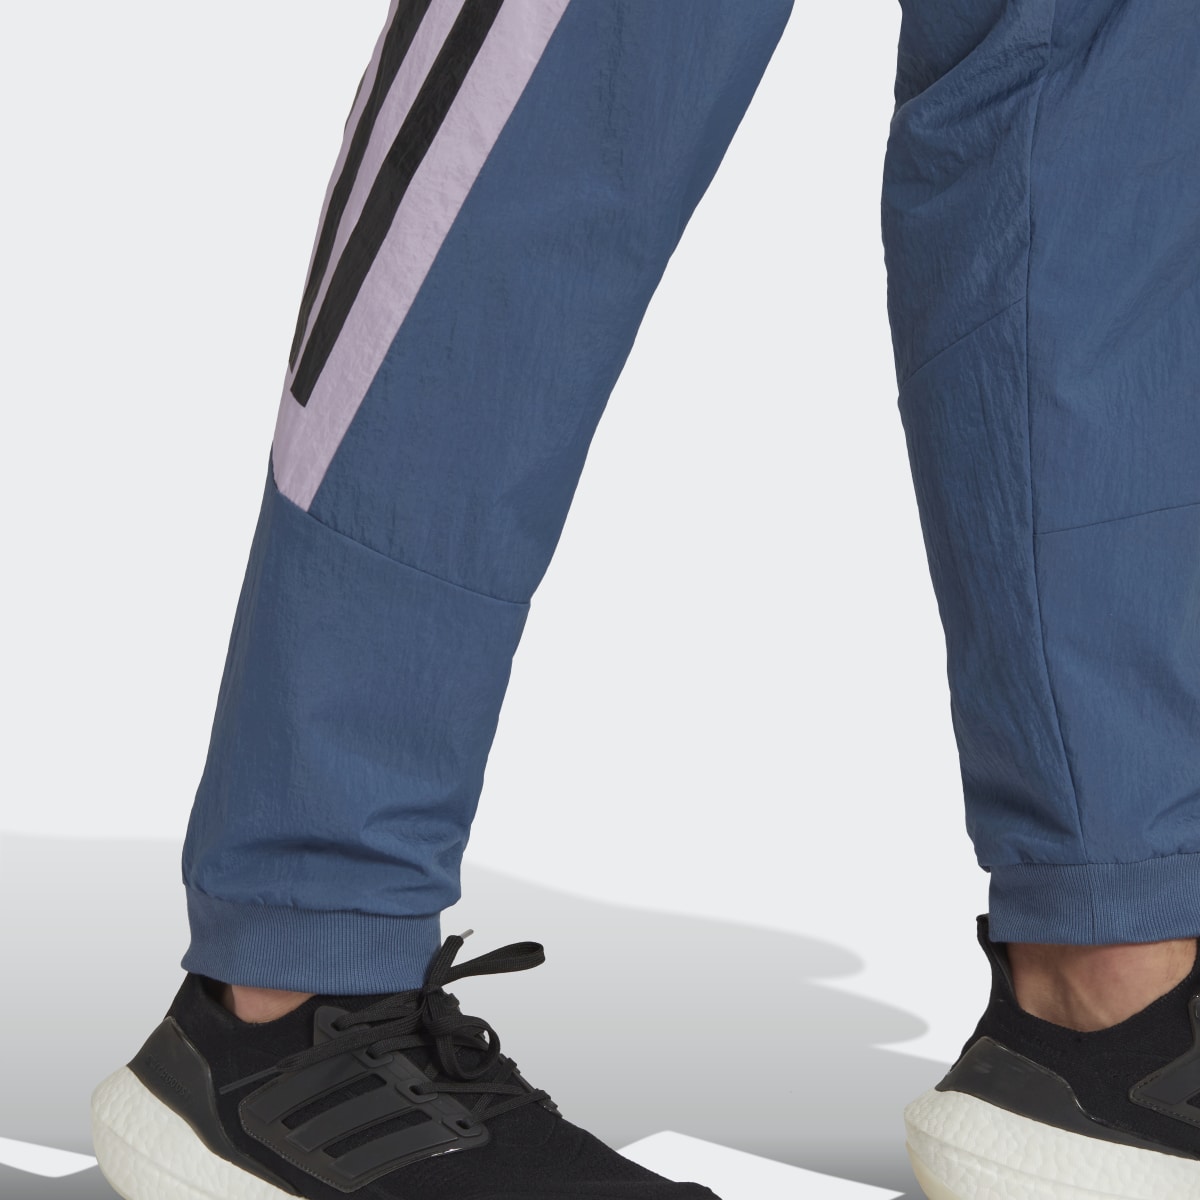 Adidas Future Icons 3-Stripes Woven Tracksuit Bottoms. 6